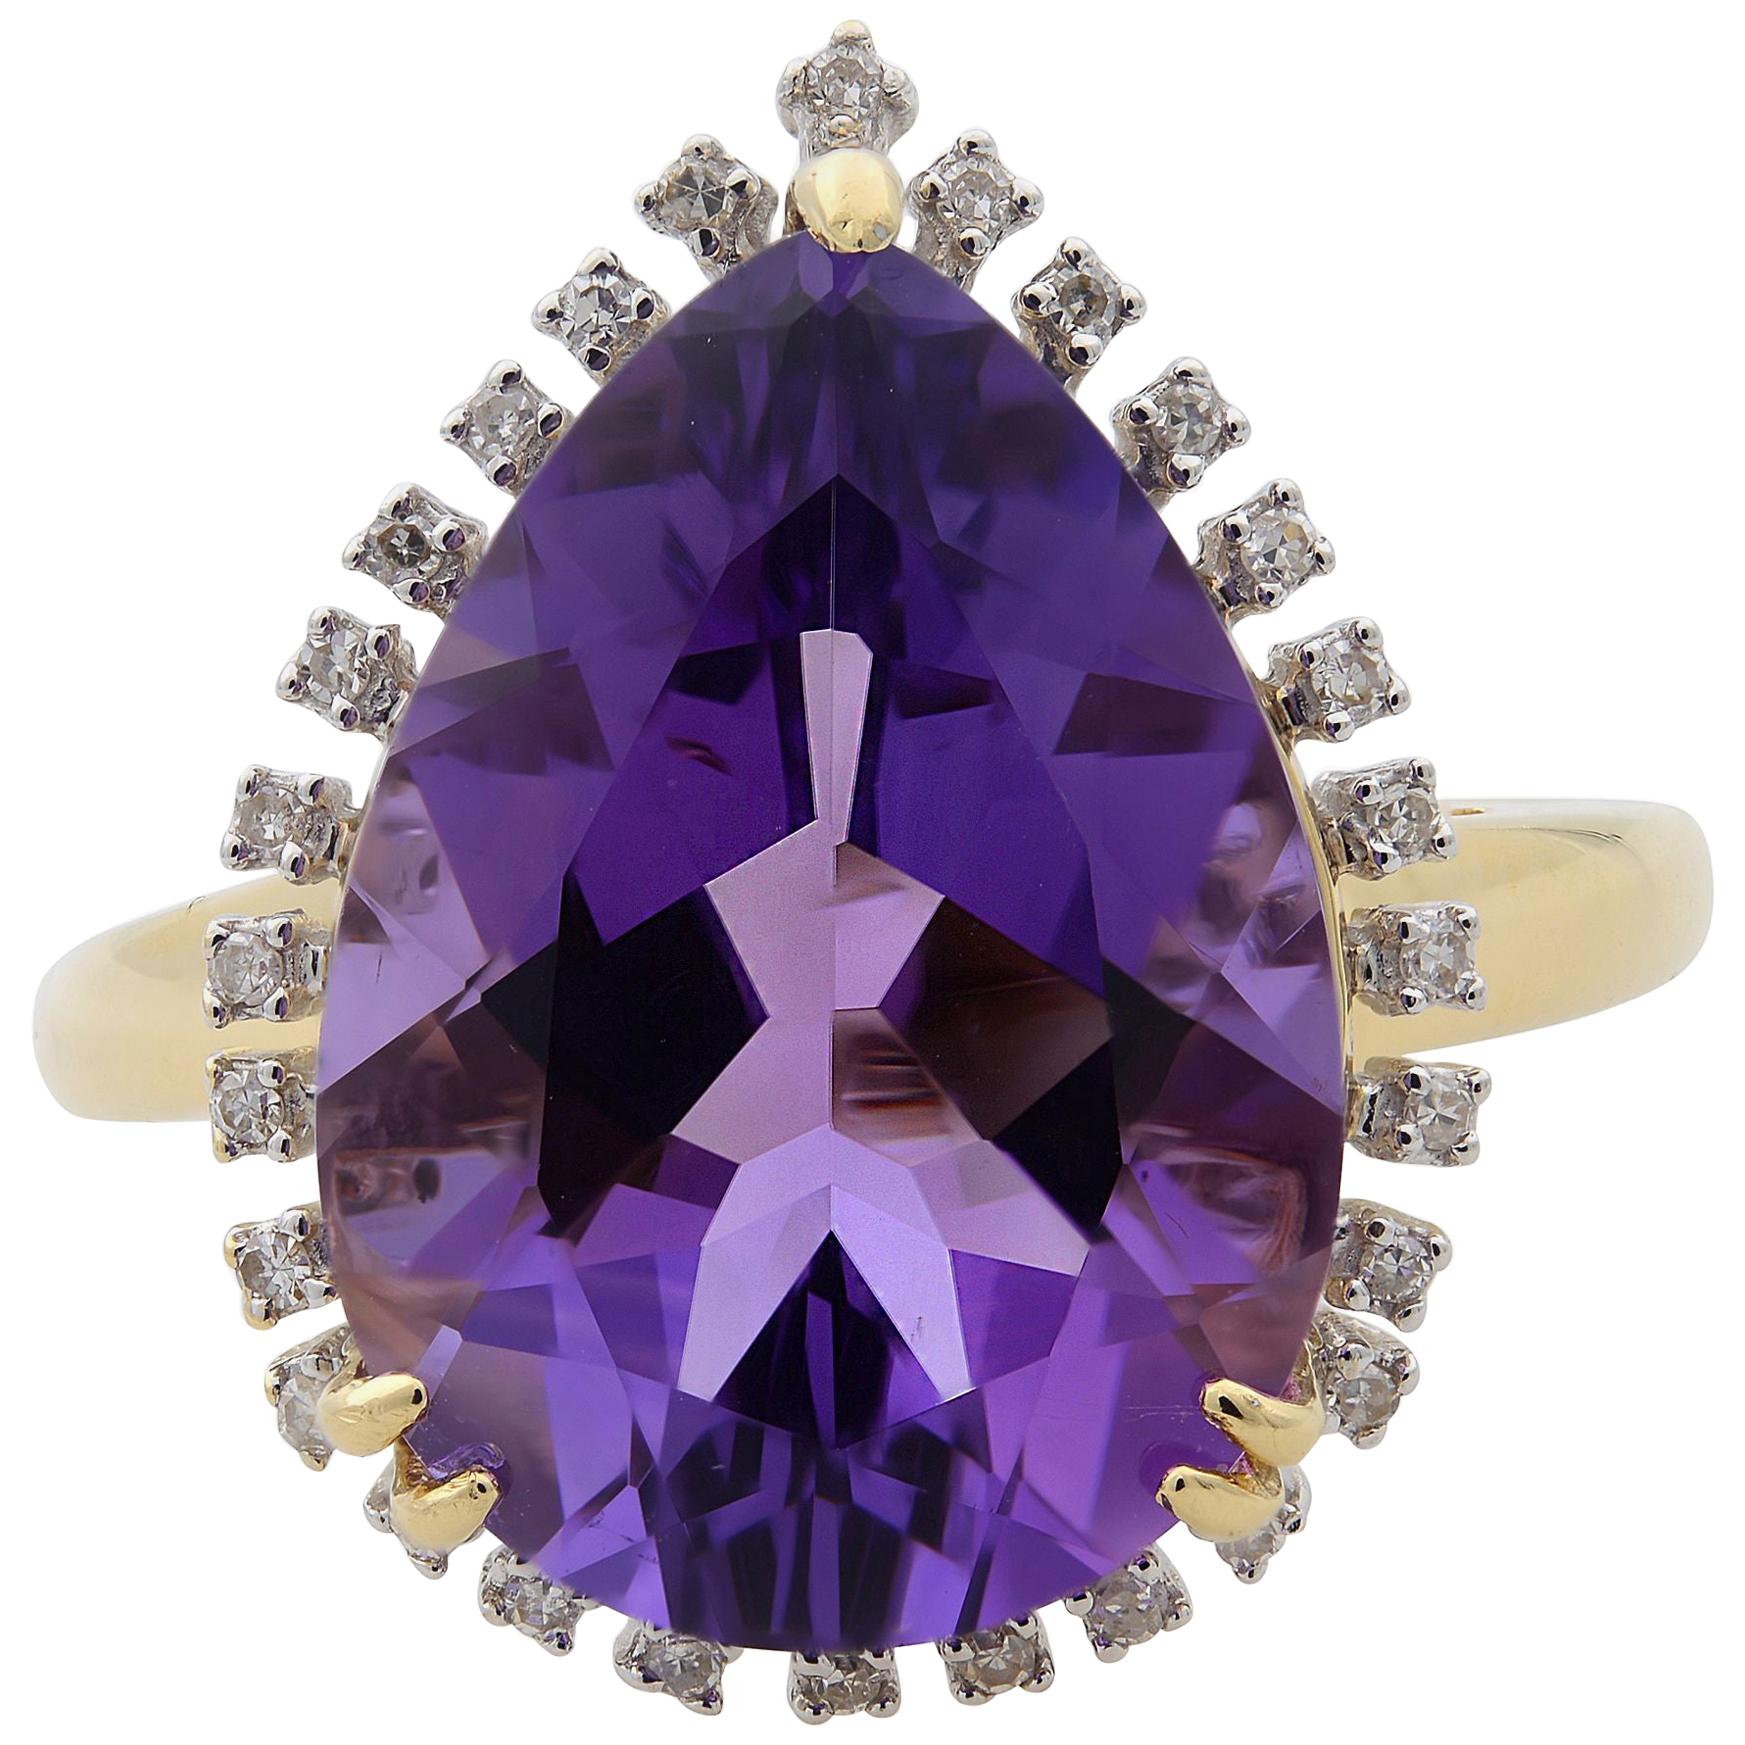 Rachel Koen Large Pear-Shaped Amethyst Cocktail Ring with Diamond Halo